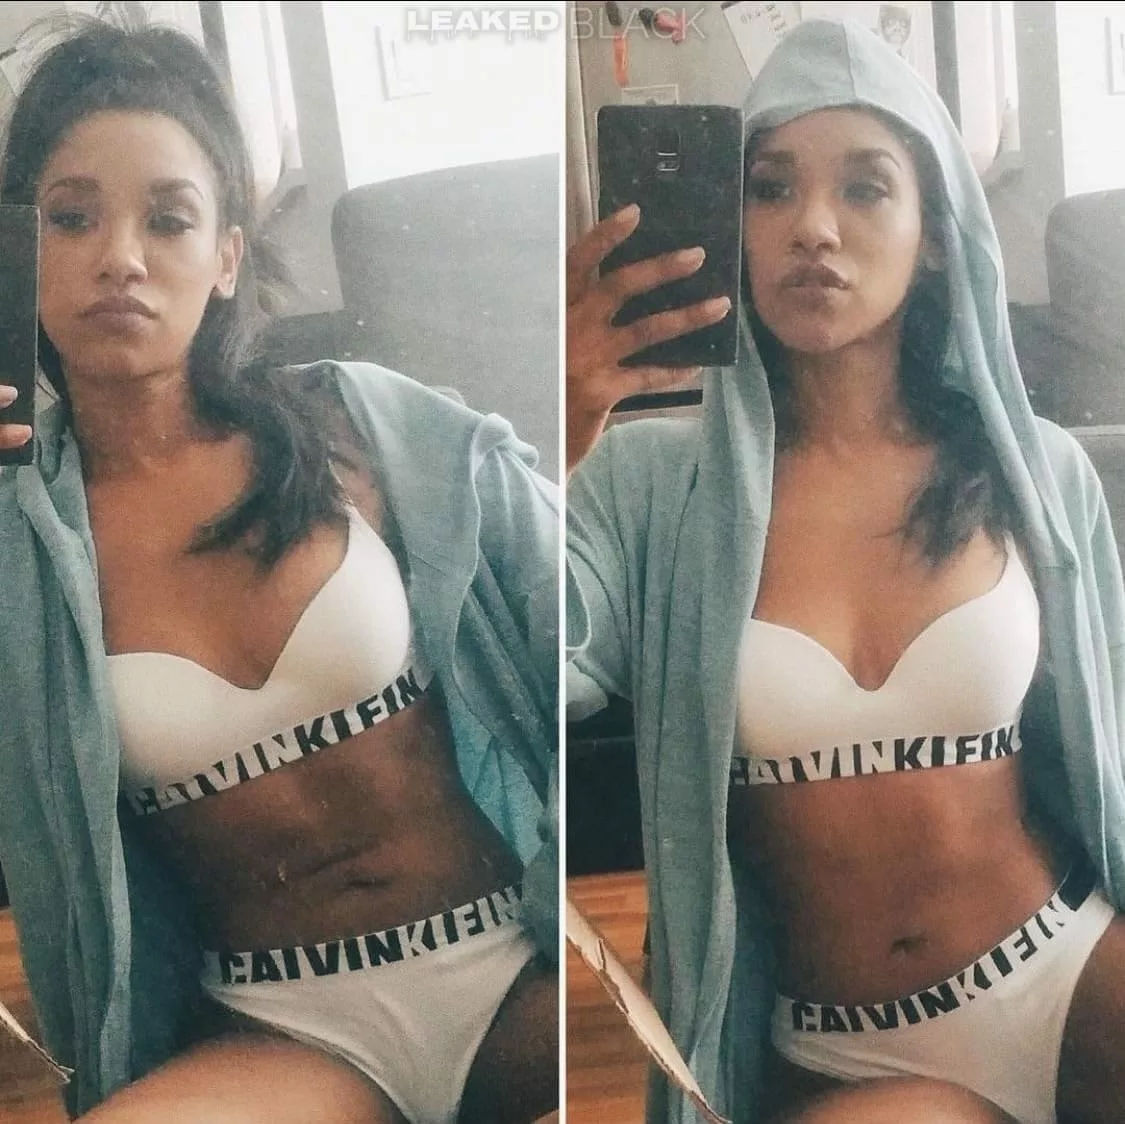 Candice patton topless